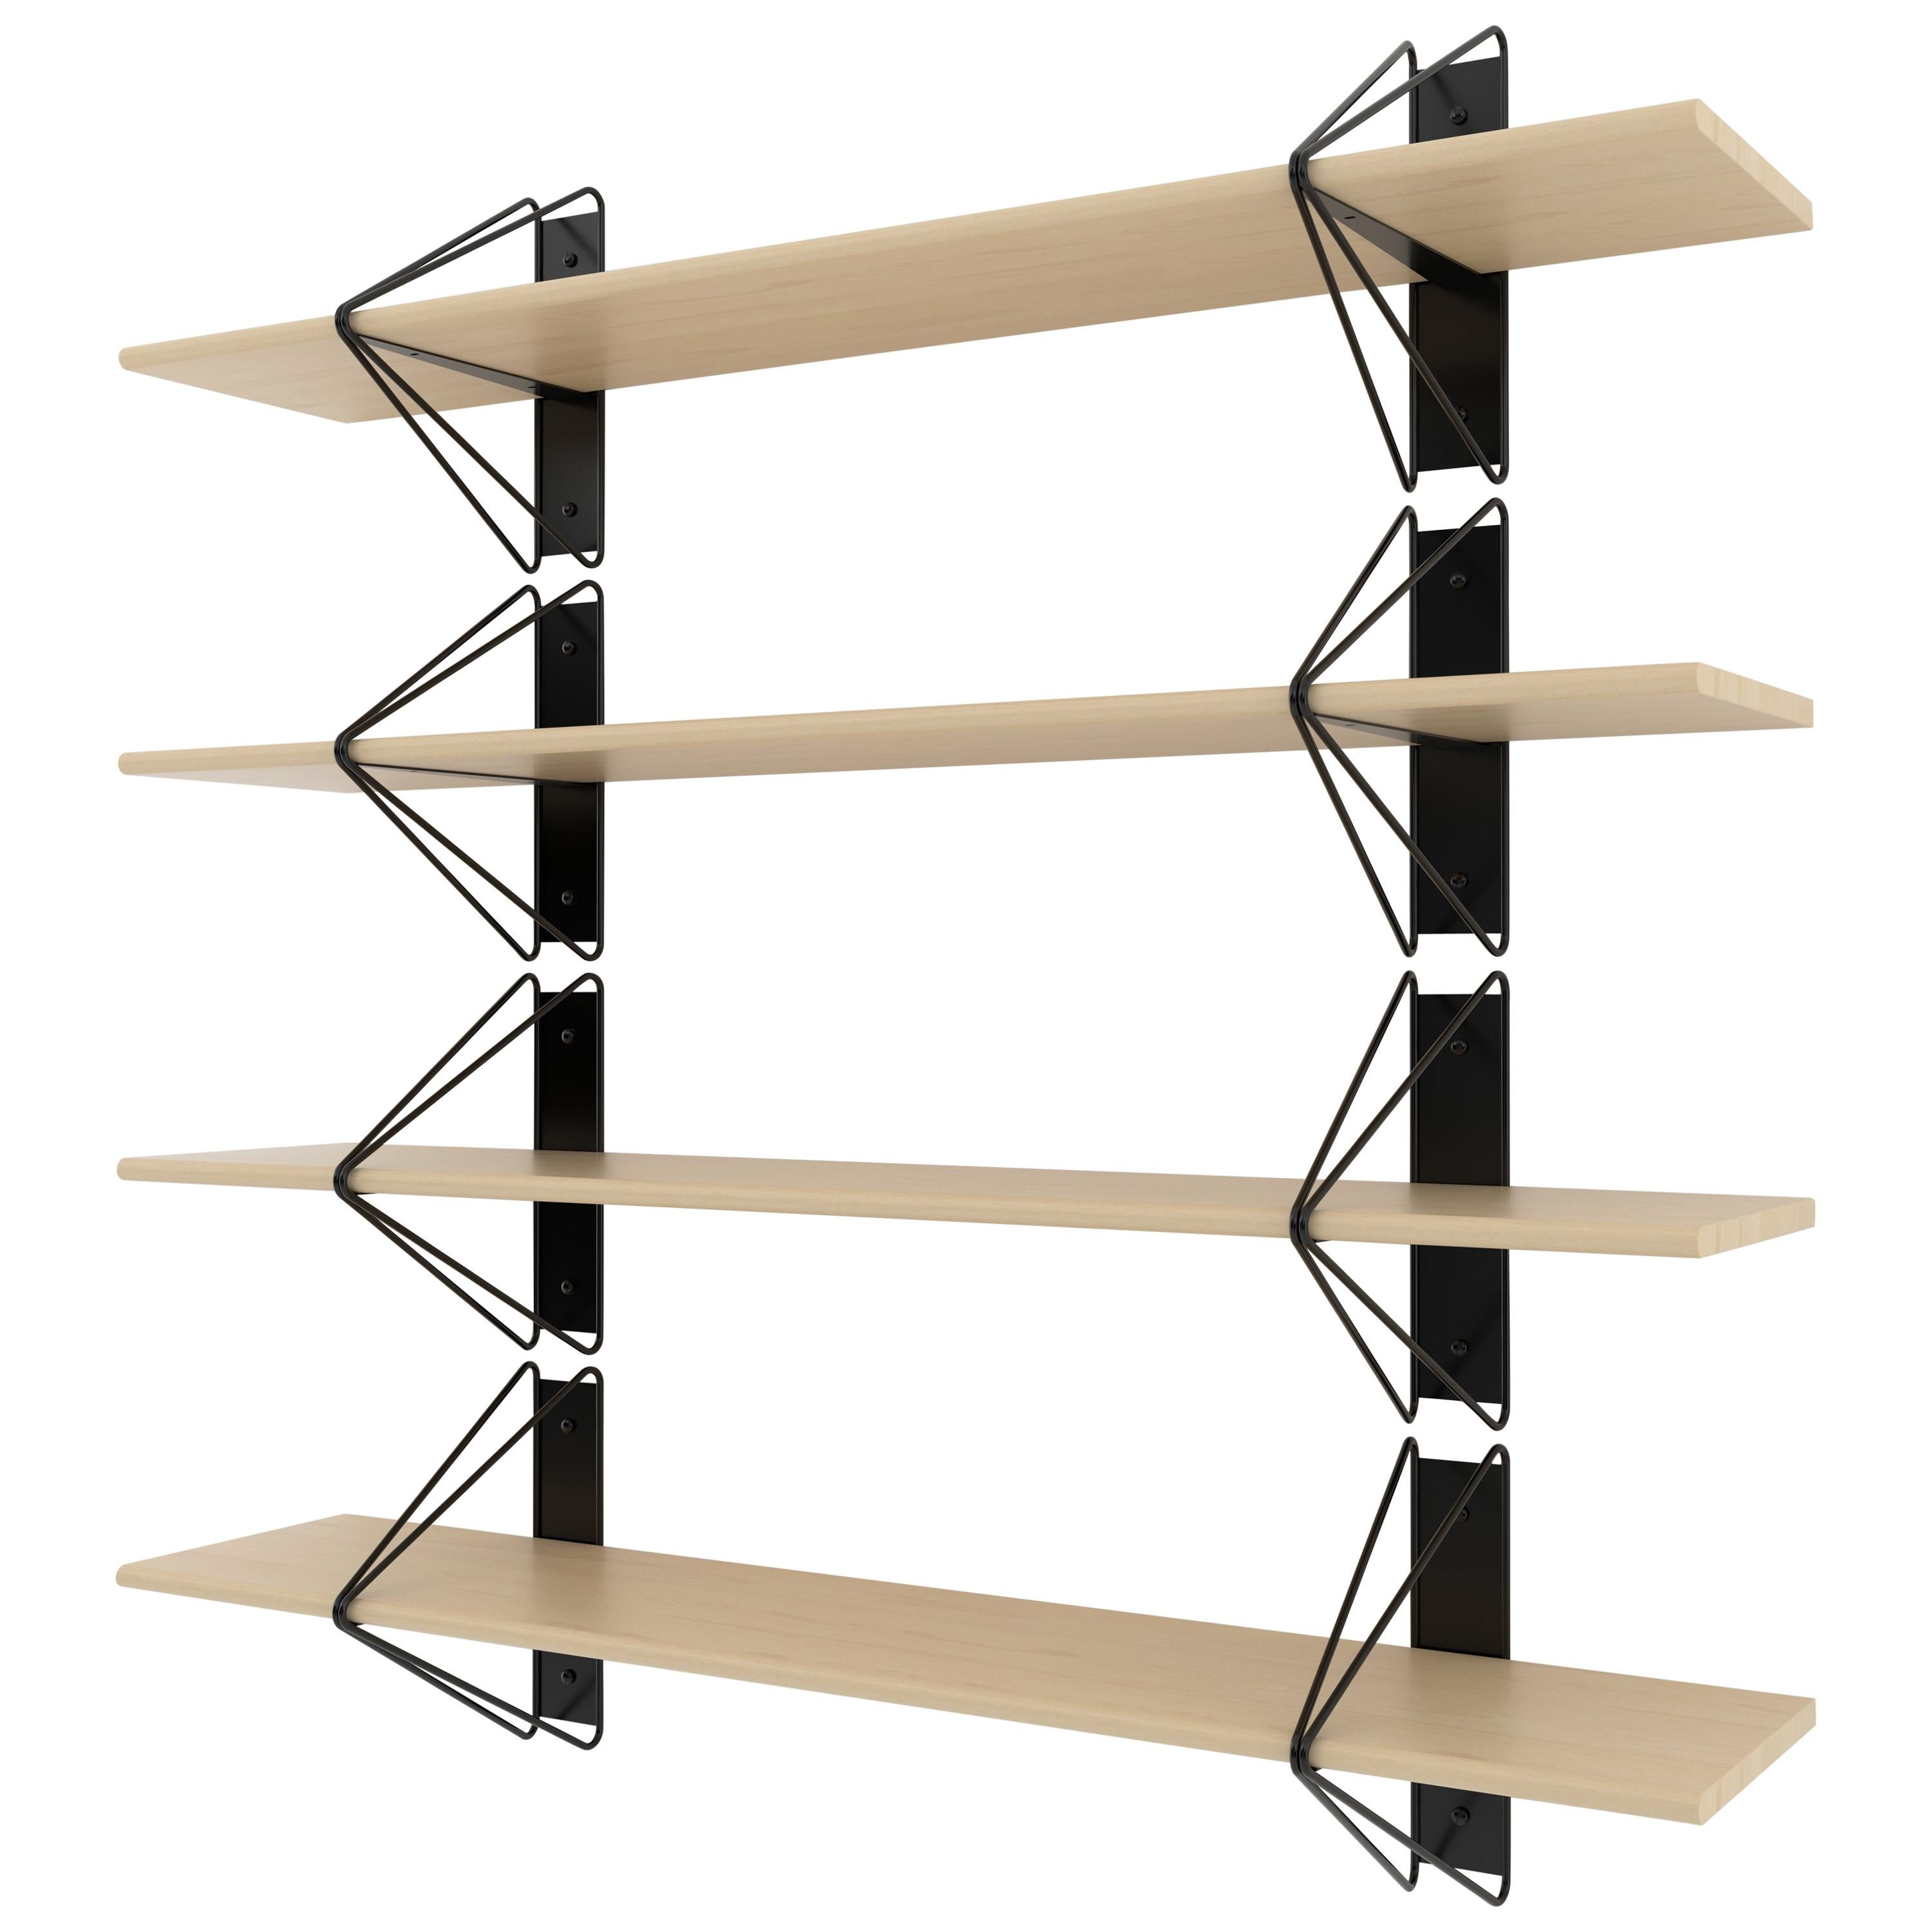 American Set of 4 Strut Shelves from Souda, 116in, Black and Walnut, Made to Order For Sale